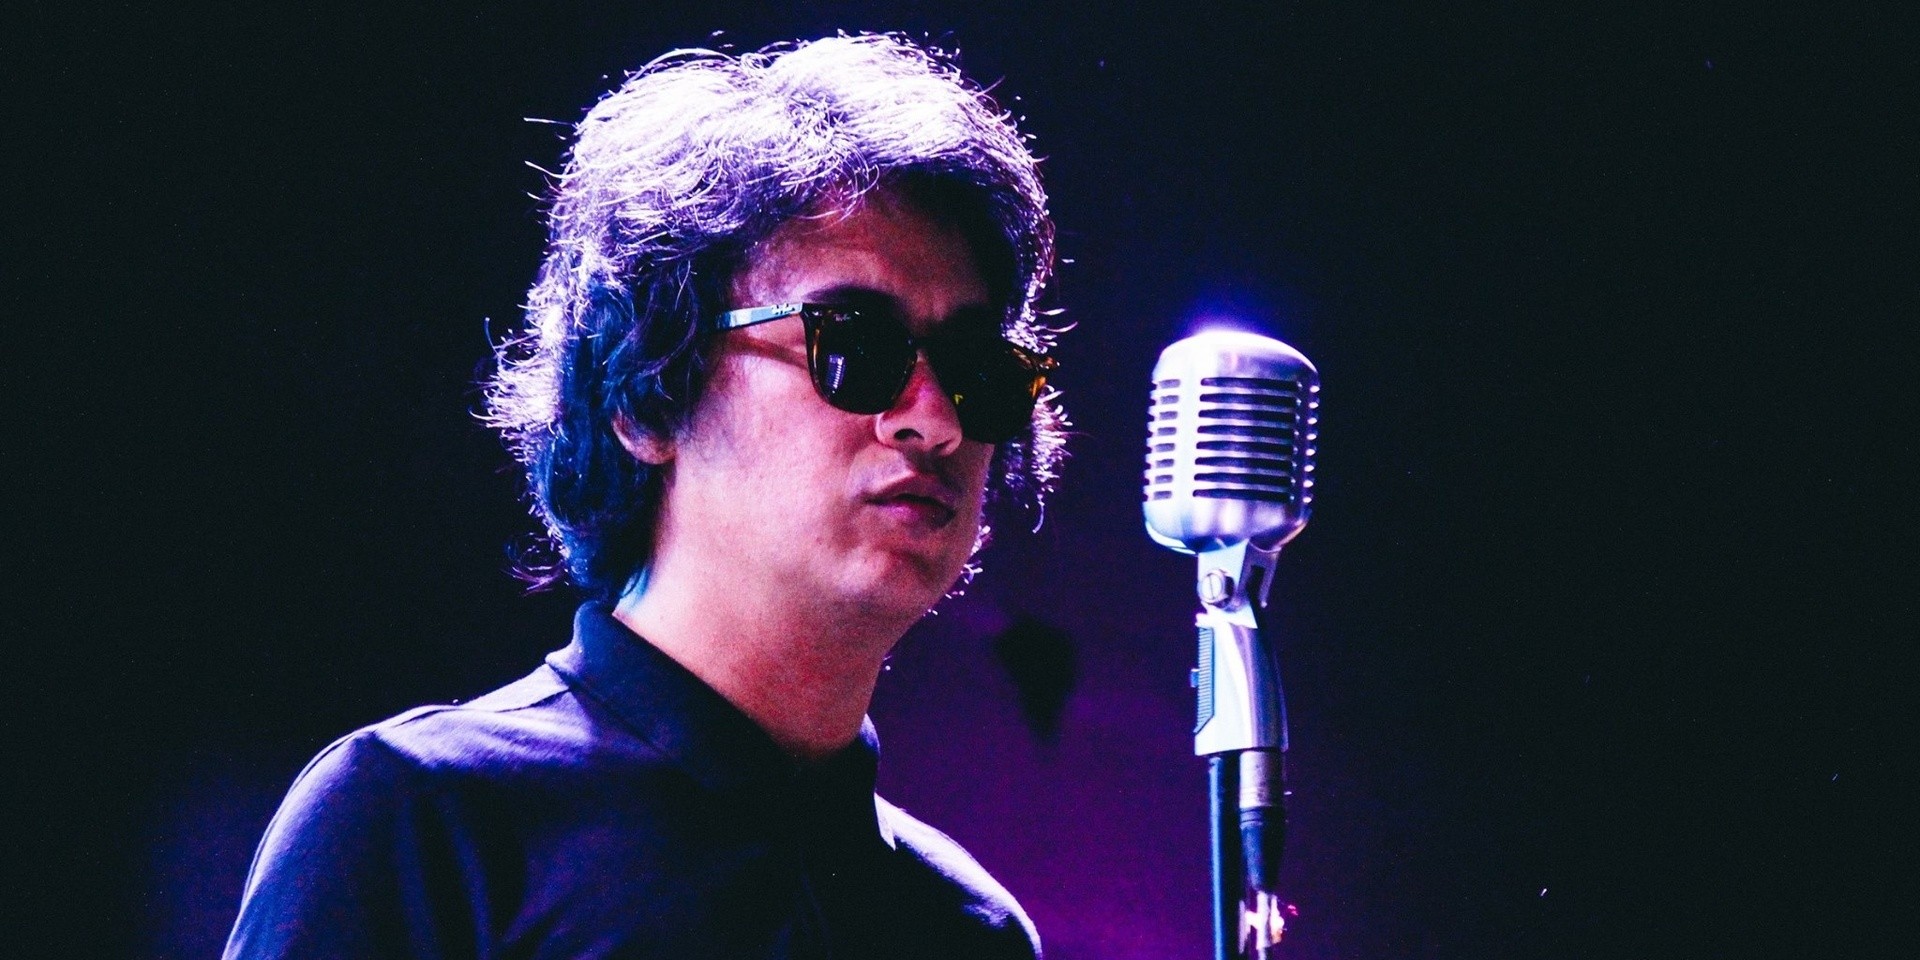 Ely Buendia tweets proof of life to dismiss death hoax